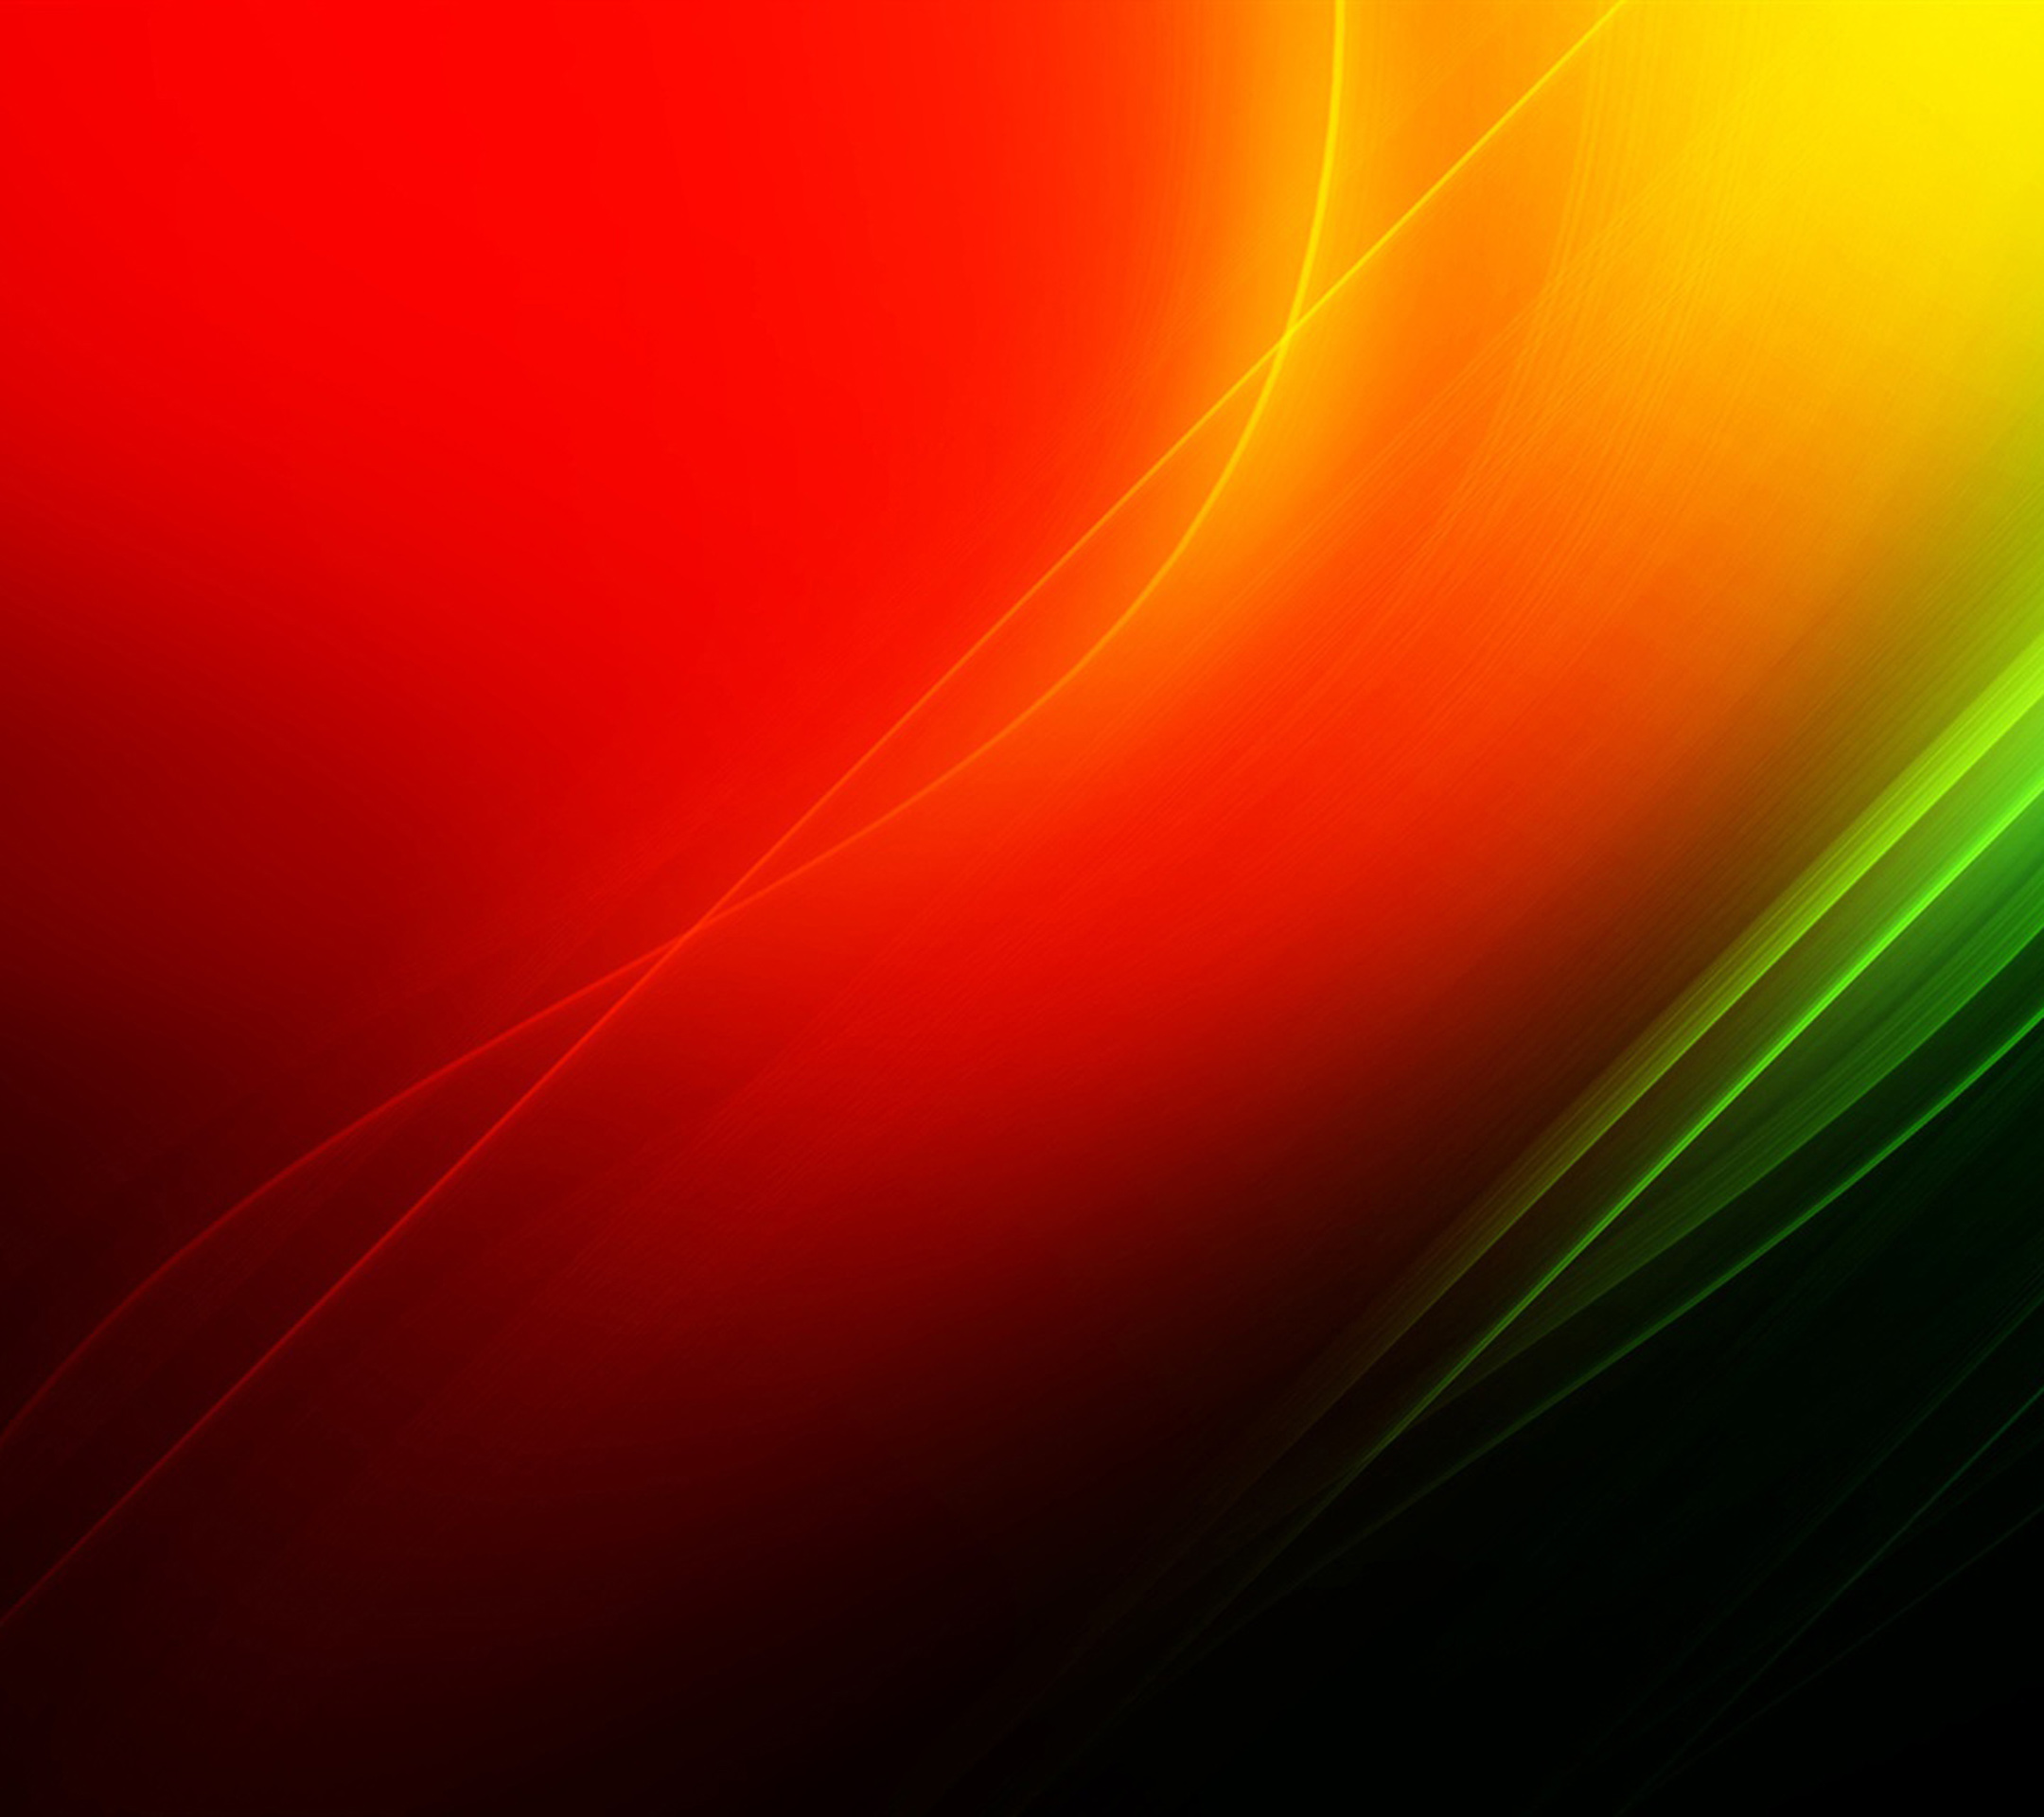 Xperia Z Wallpapers HD - Beautiful, stunning wallpapers